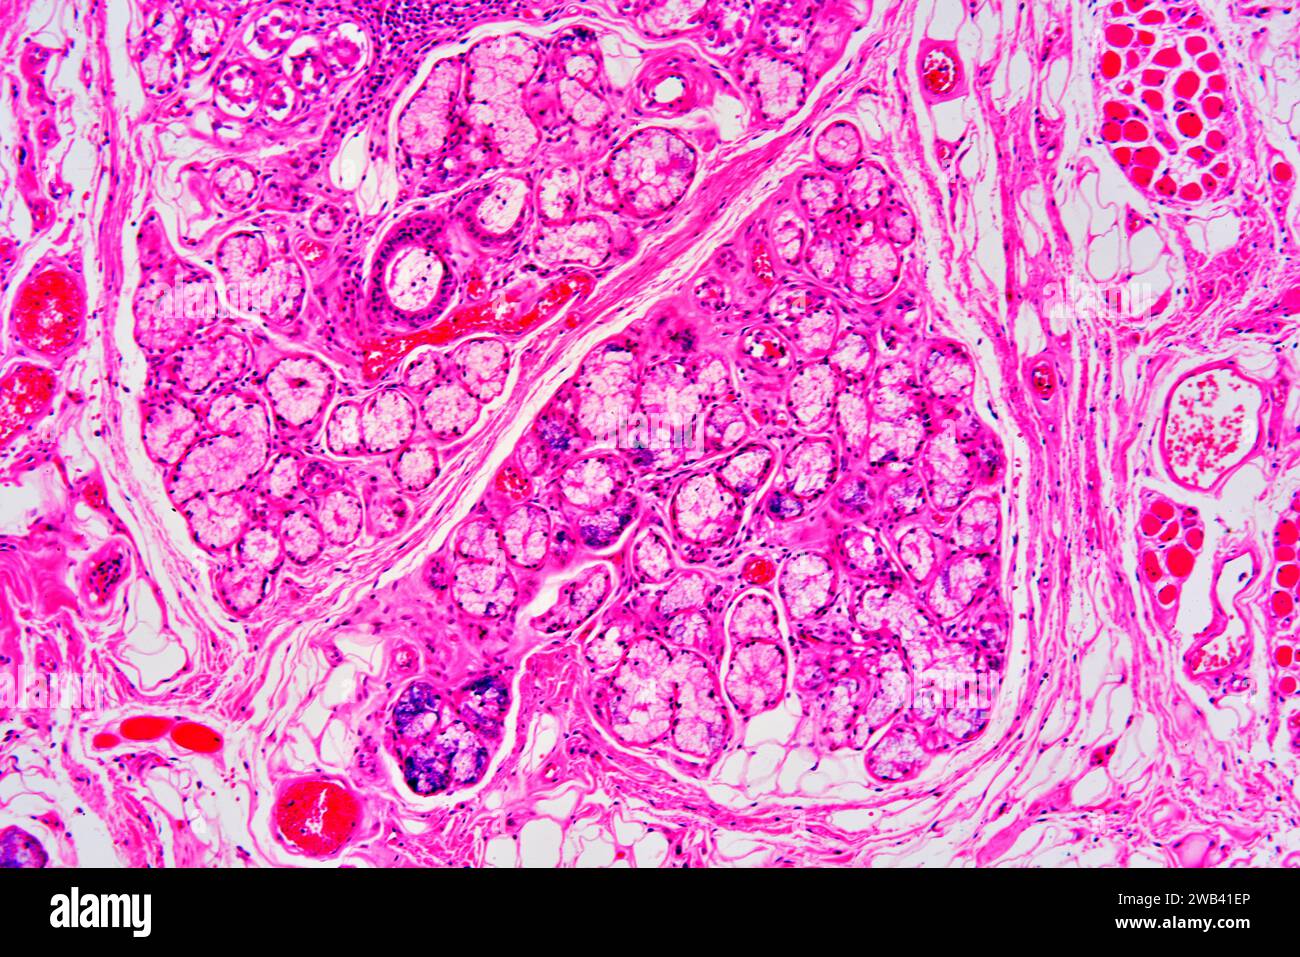 Parotid gland is the bigger salivary gland. We can see mucous gland (Weber gland), serous gland (Ebner gland), connective tissue, muscle fibers and bl Stock Photo